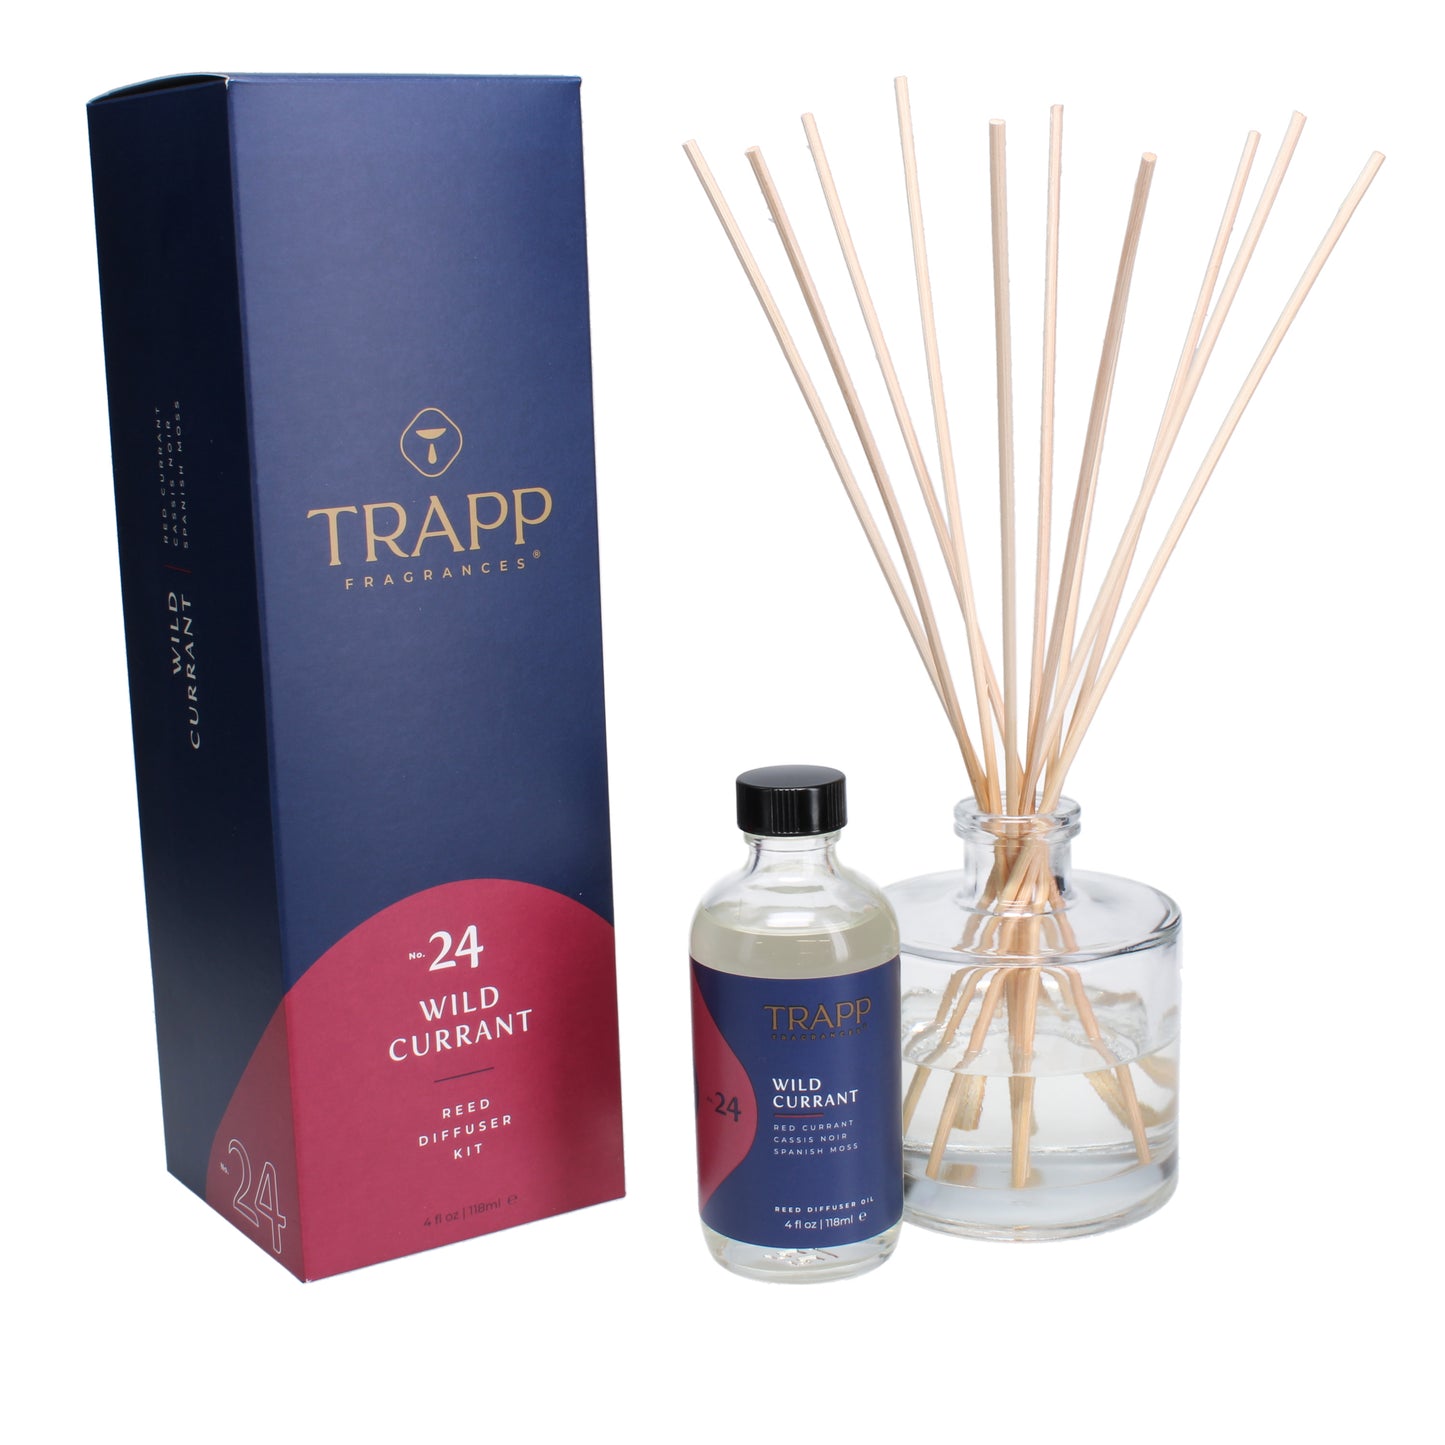 No. 24 Wild Currant 4 oz. Reed Diffuser Kit Image 2